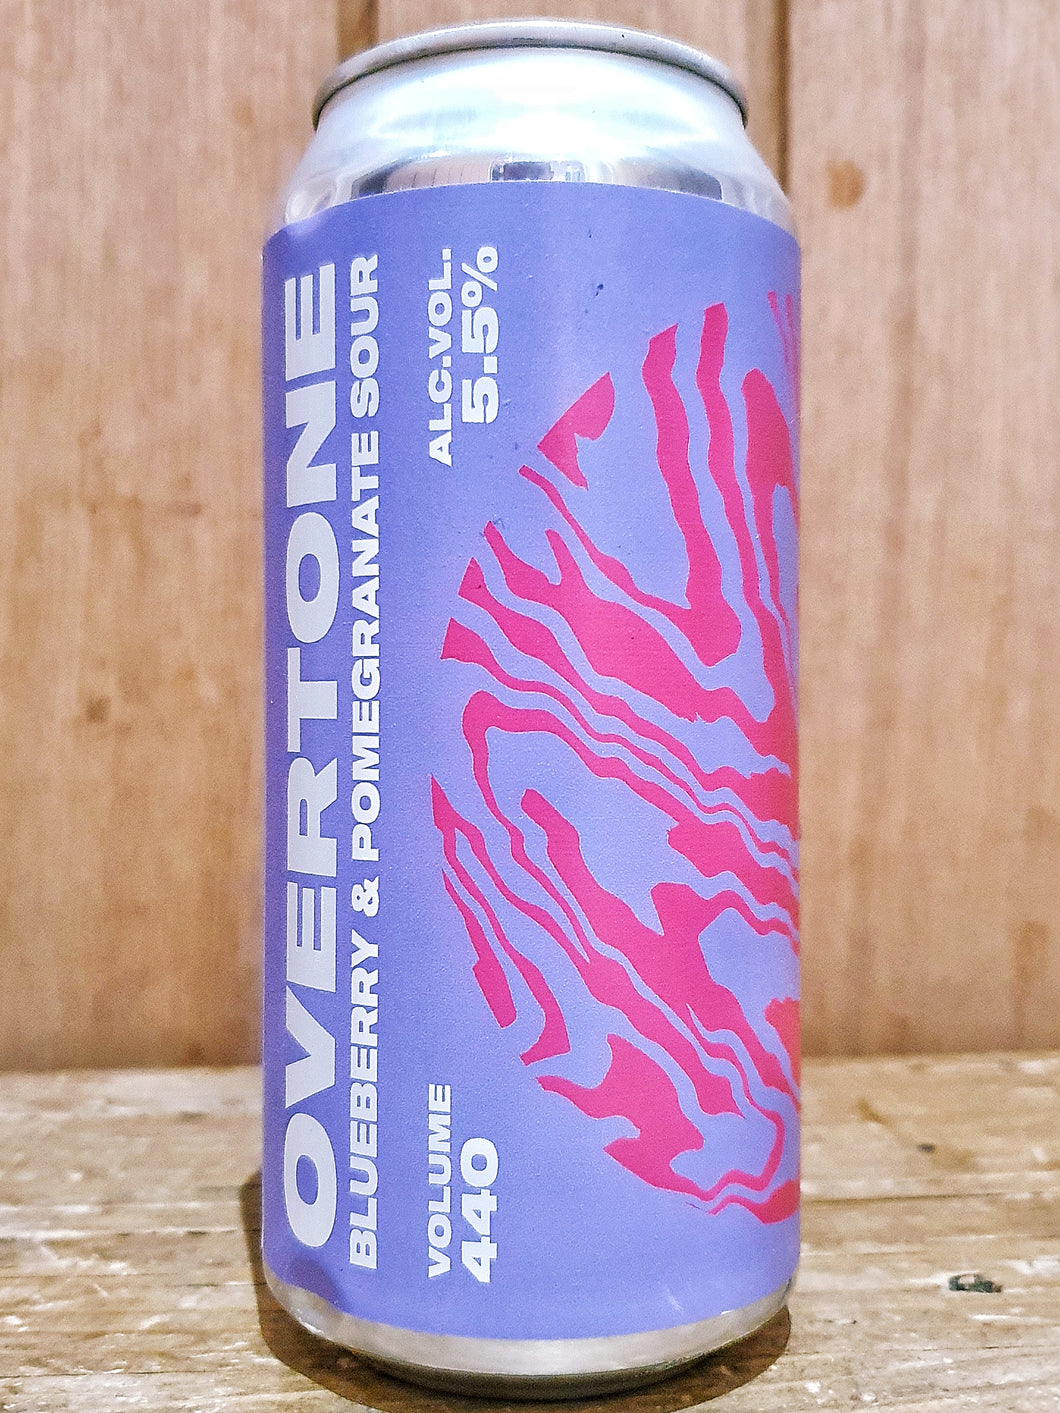 Overtone - Blueberry and Pomegranate Sour